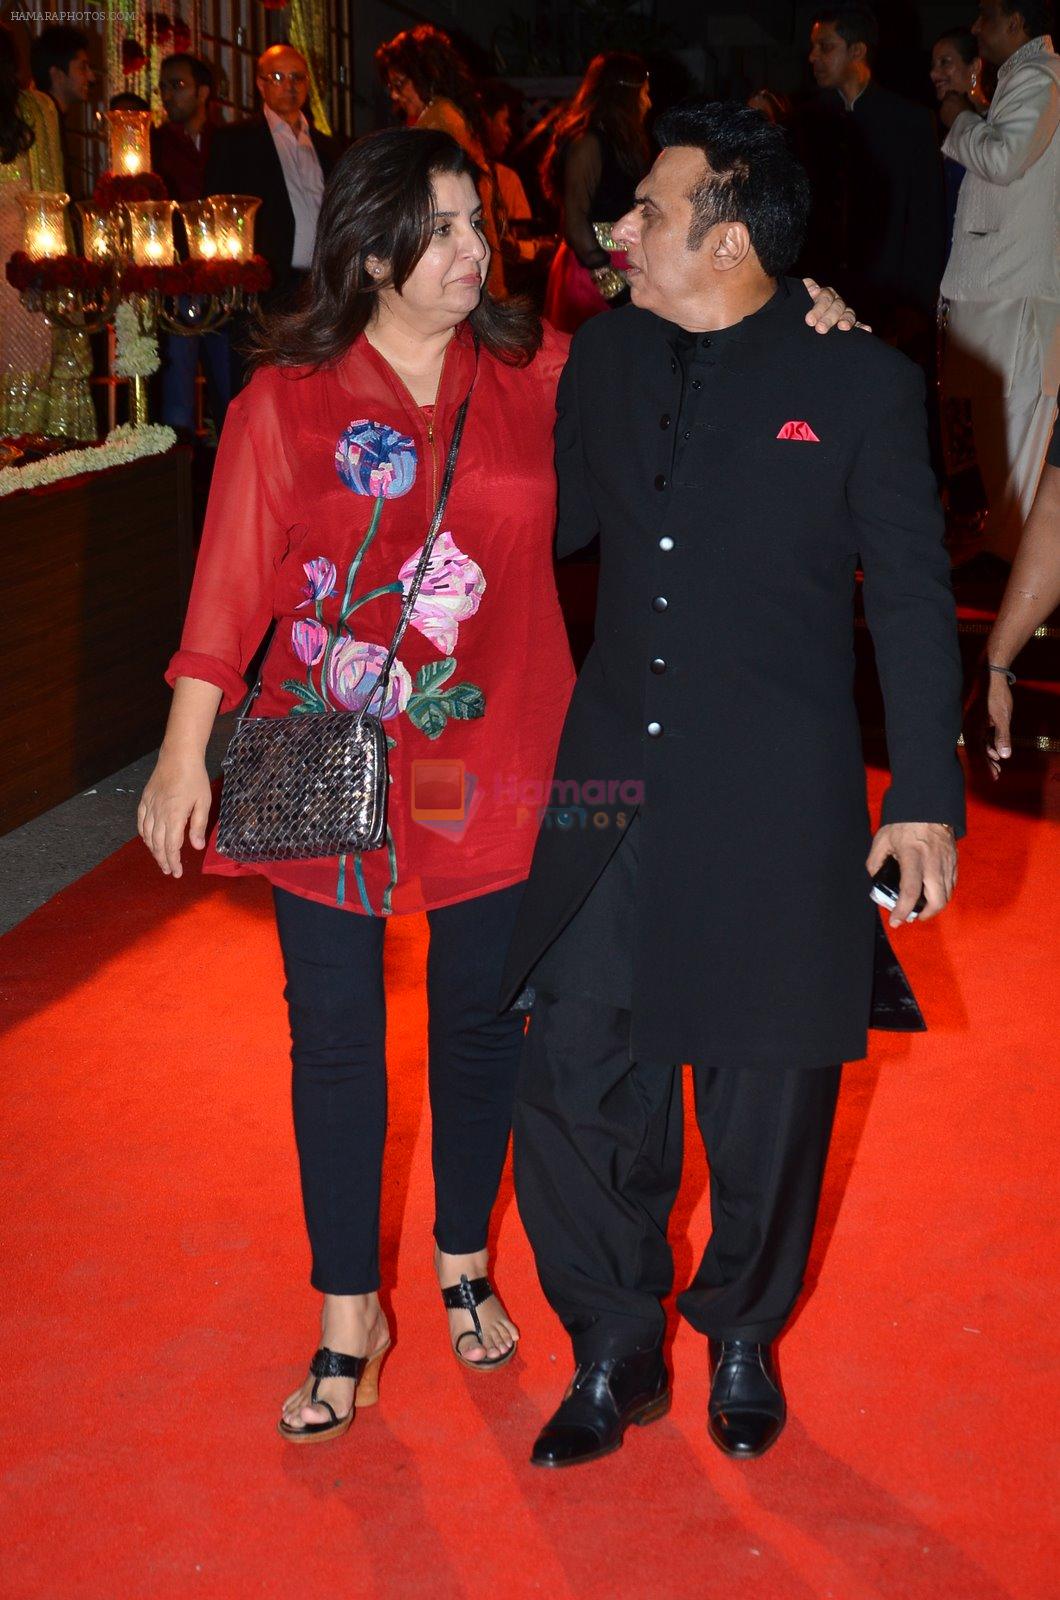 Farah Khan at Vikram Singh's Brother Uday and Ali Morani's daughter Shirin's Sangeet Ceremony in Blue sea on 20th Dec 2014